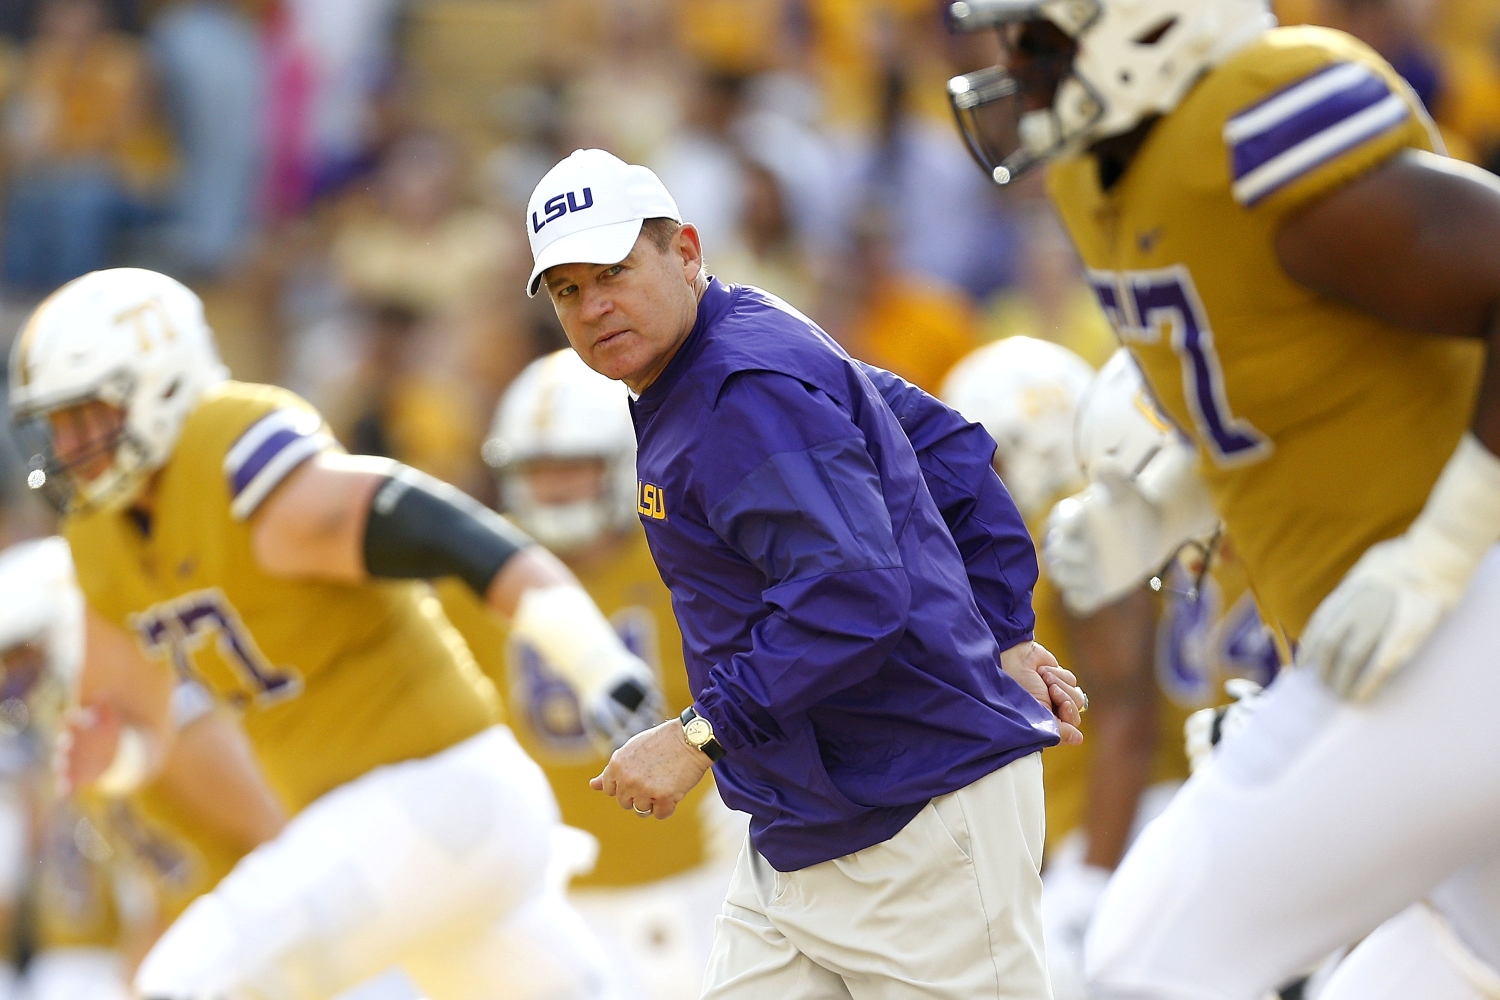 Les Miles’ Disturbing Pattern of Alleged Sexual Misconduct Forced LSU to Take Drastic Legal Measures to Protect Female Students